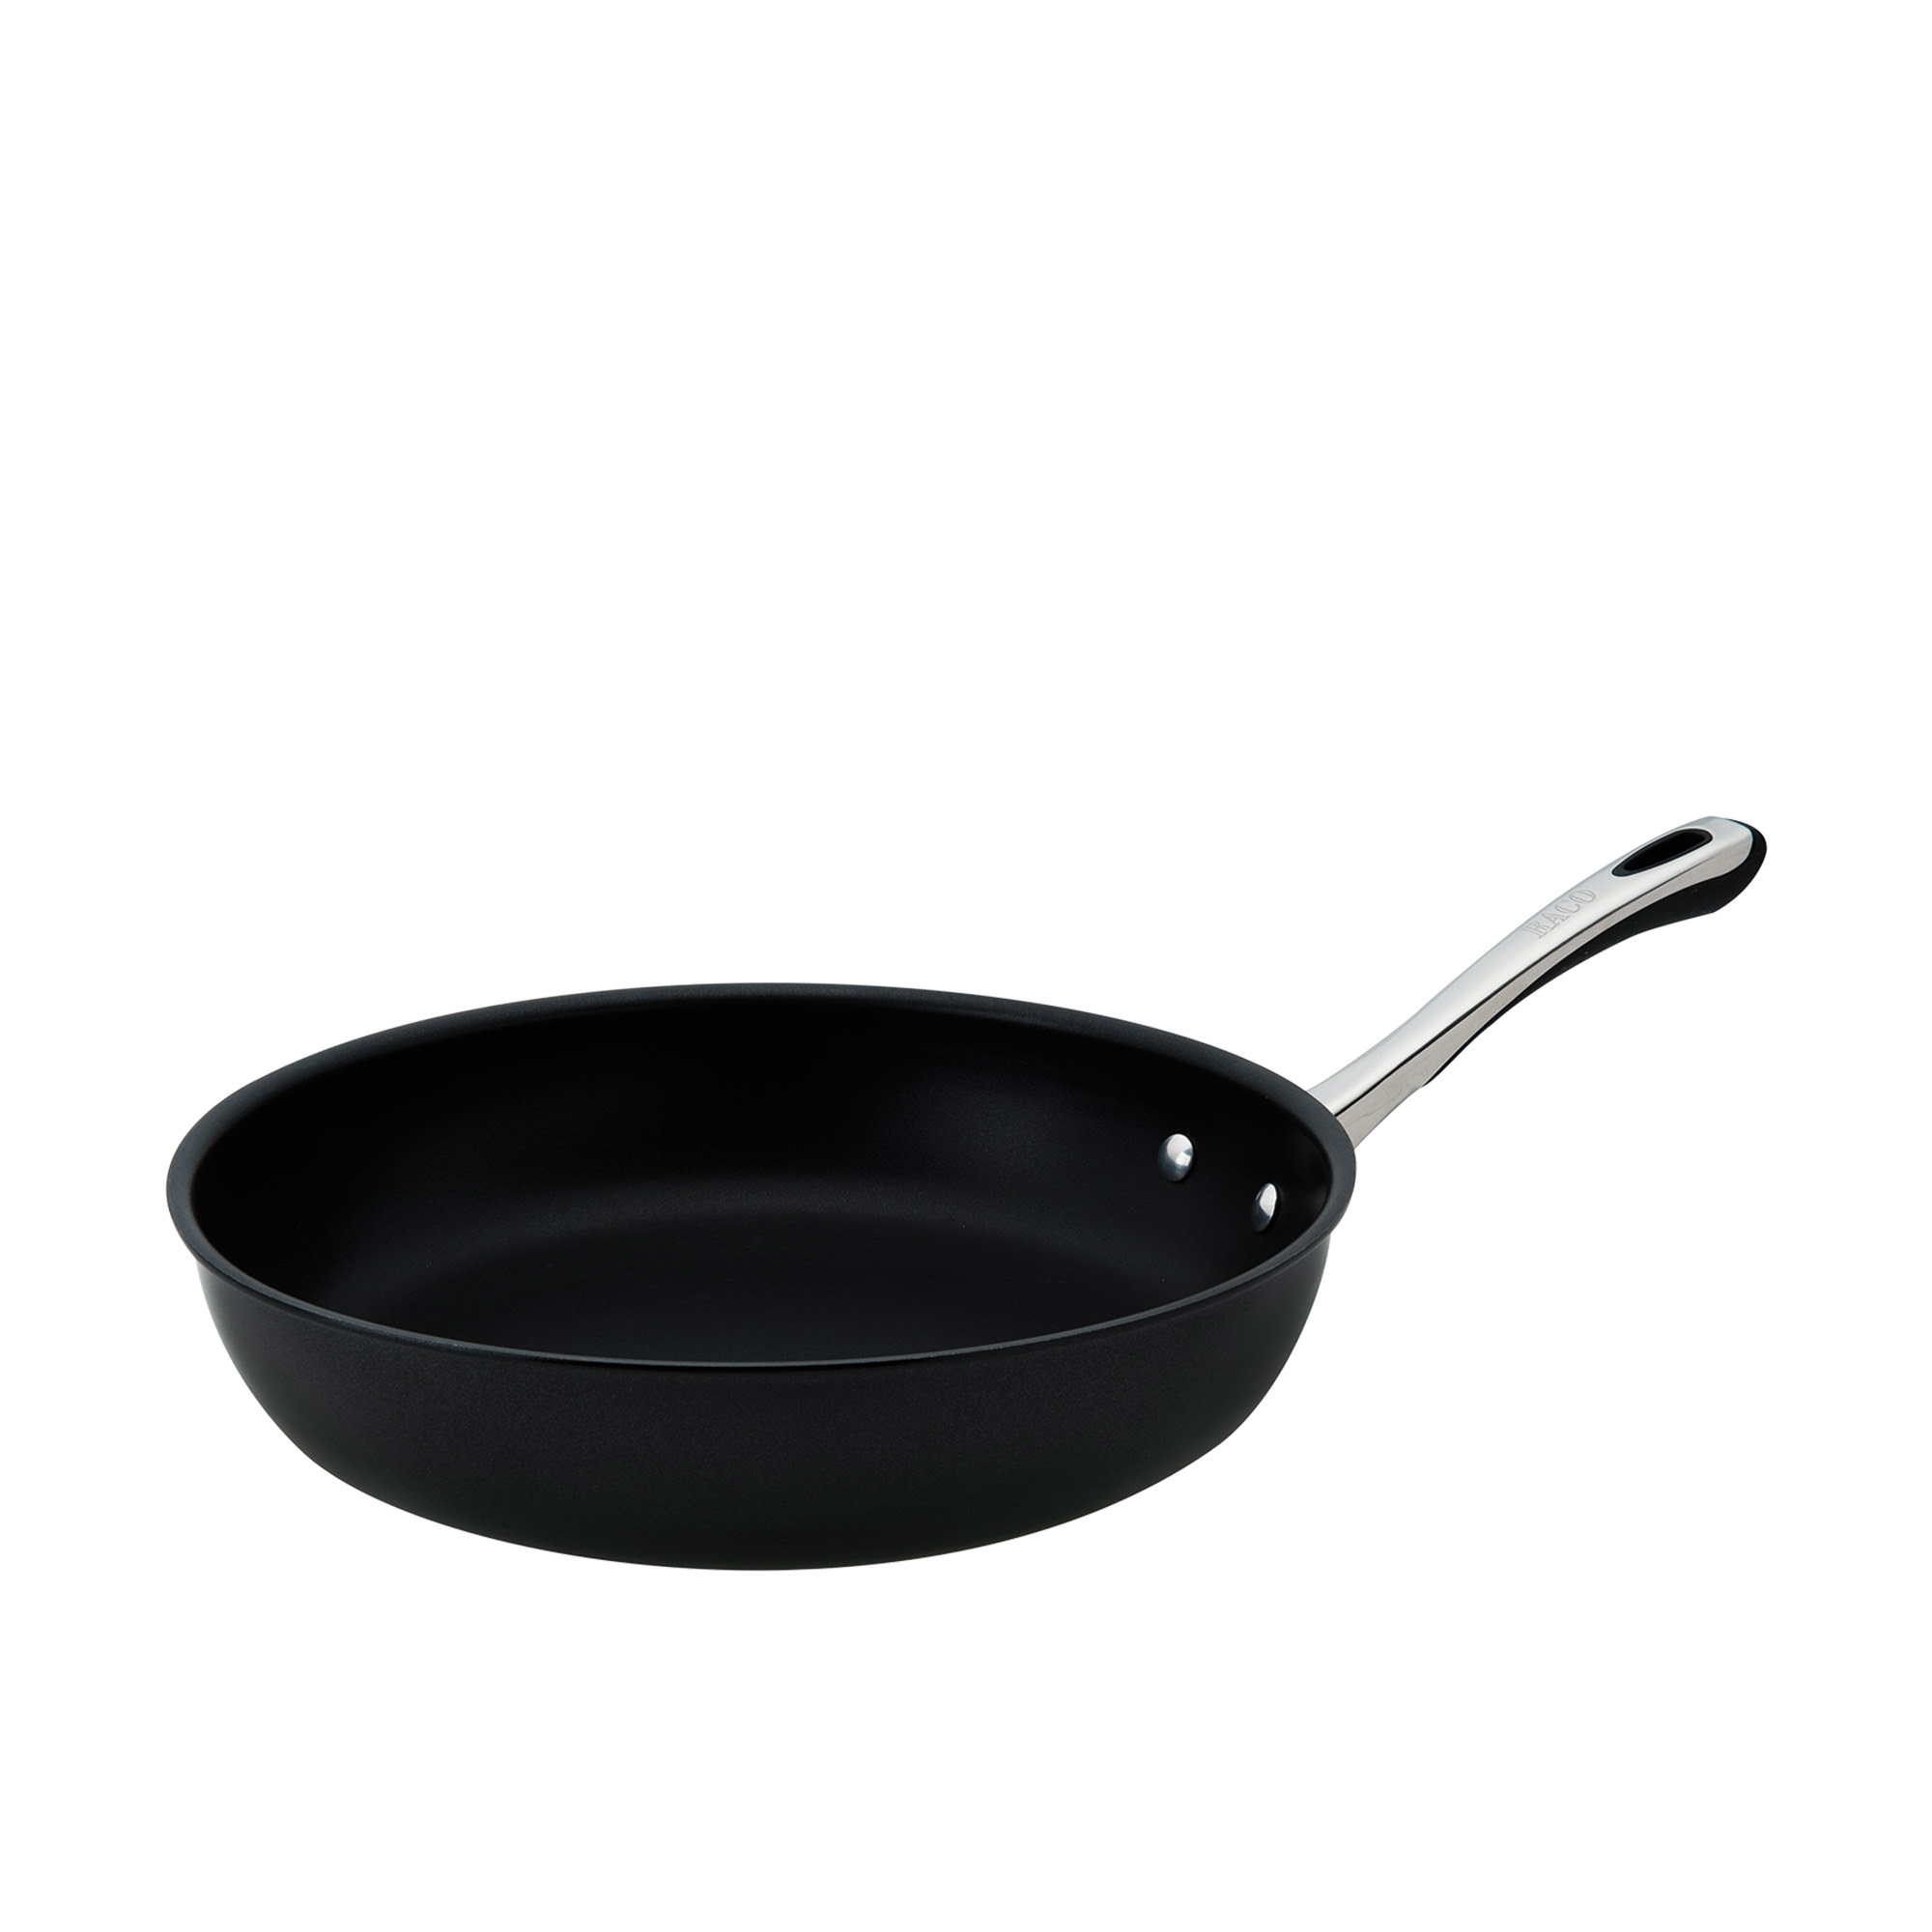 Raco Contemporary French Skillet 28cm Image 1